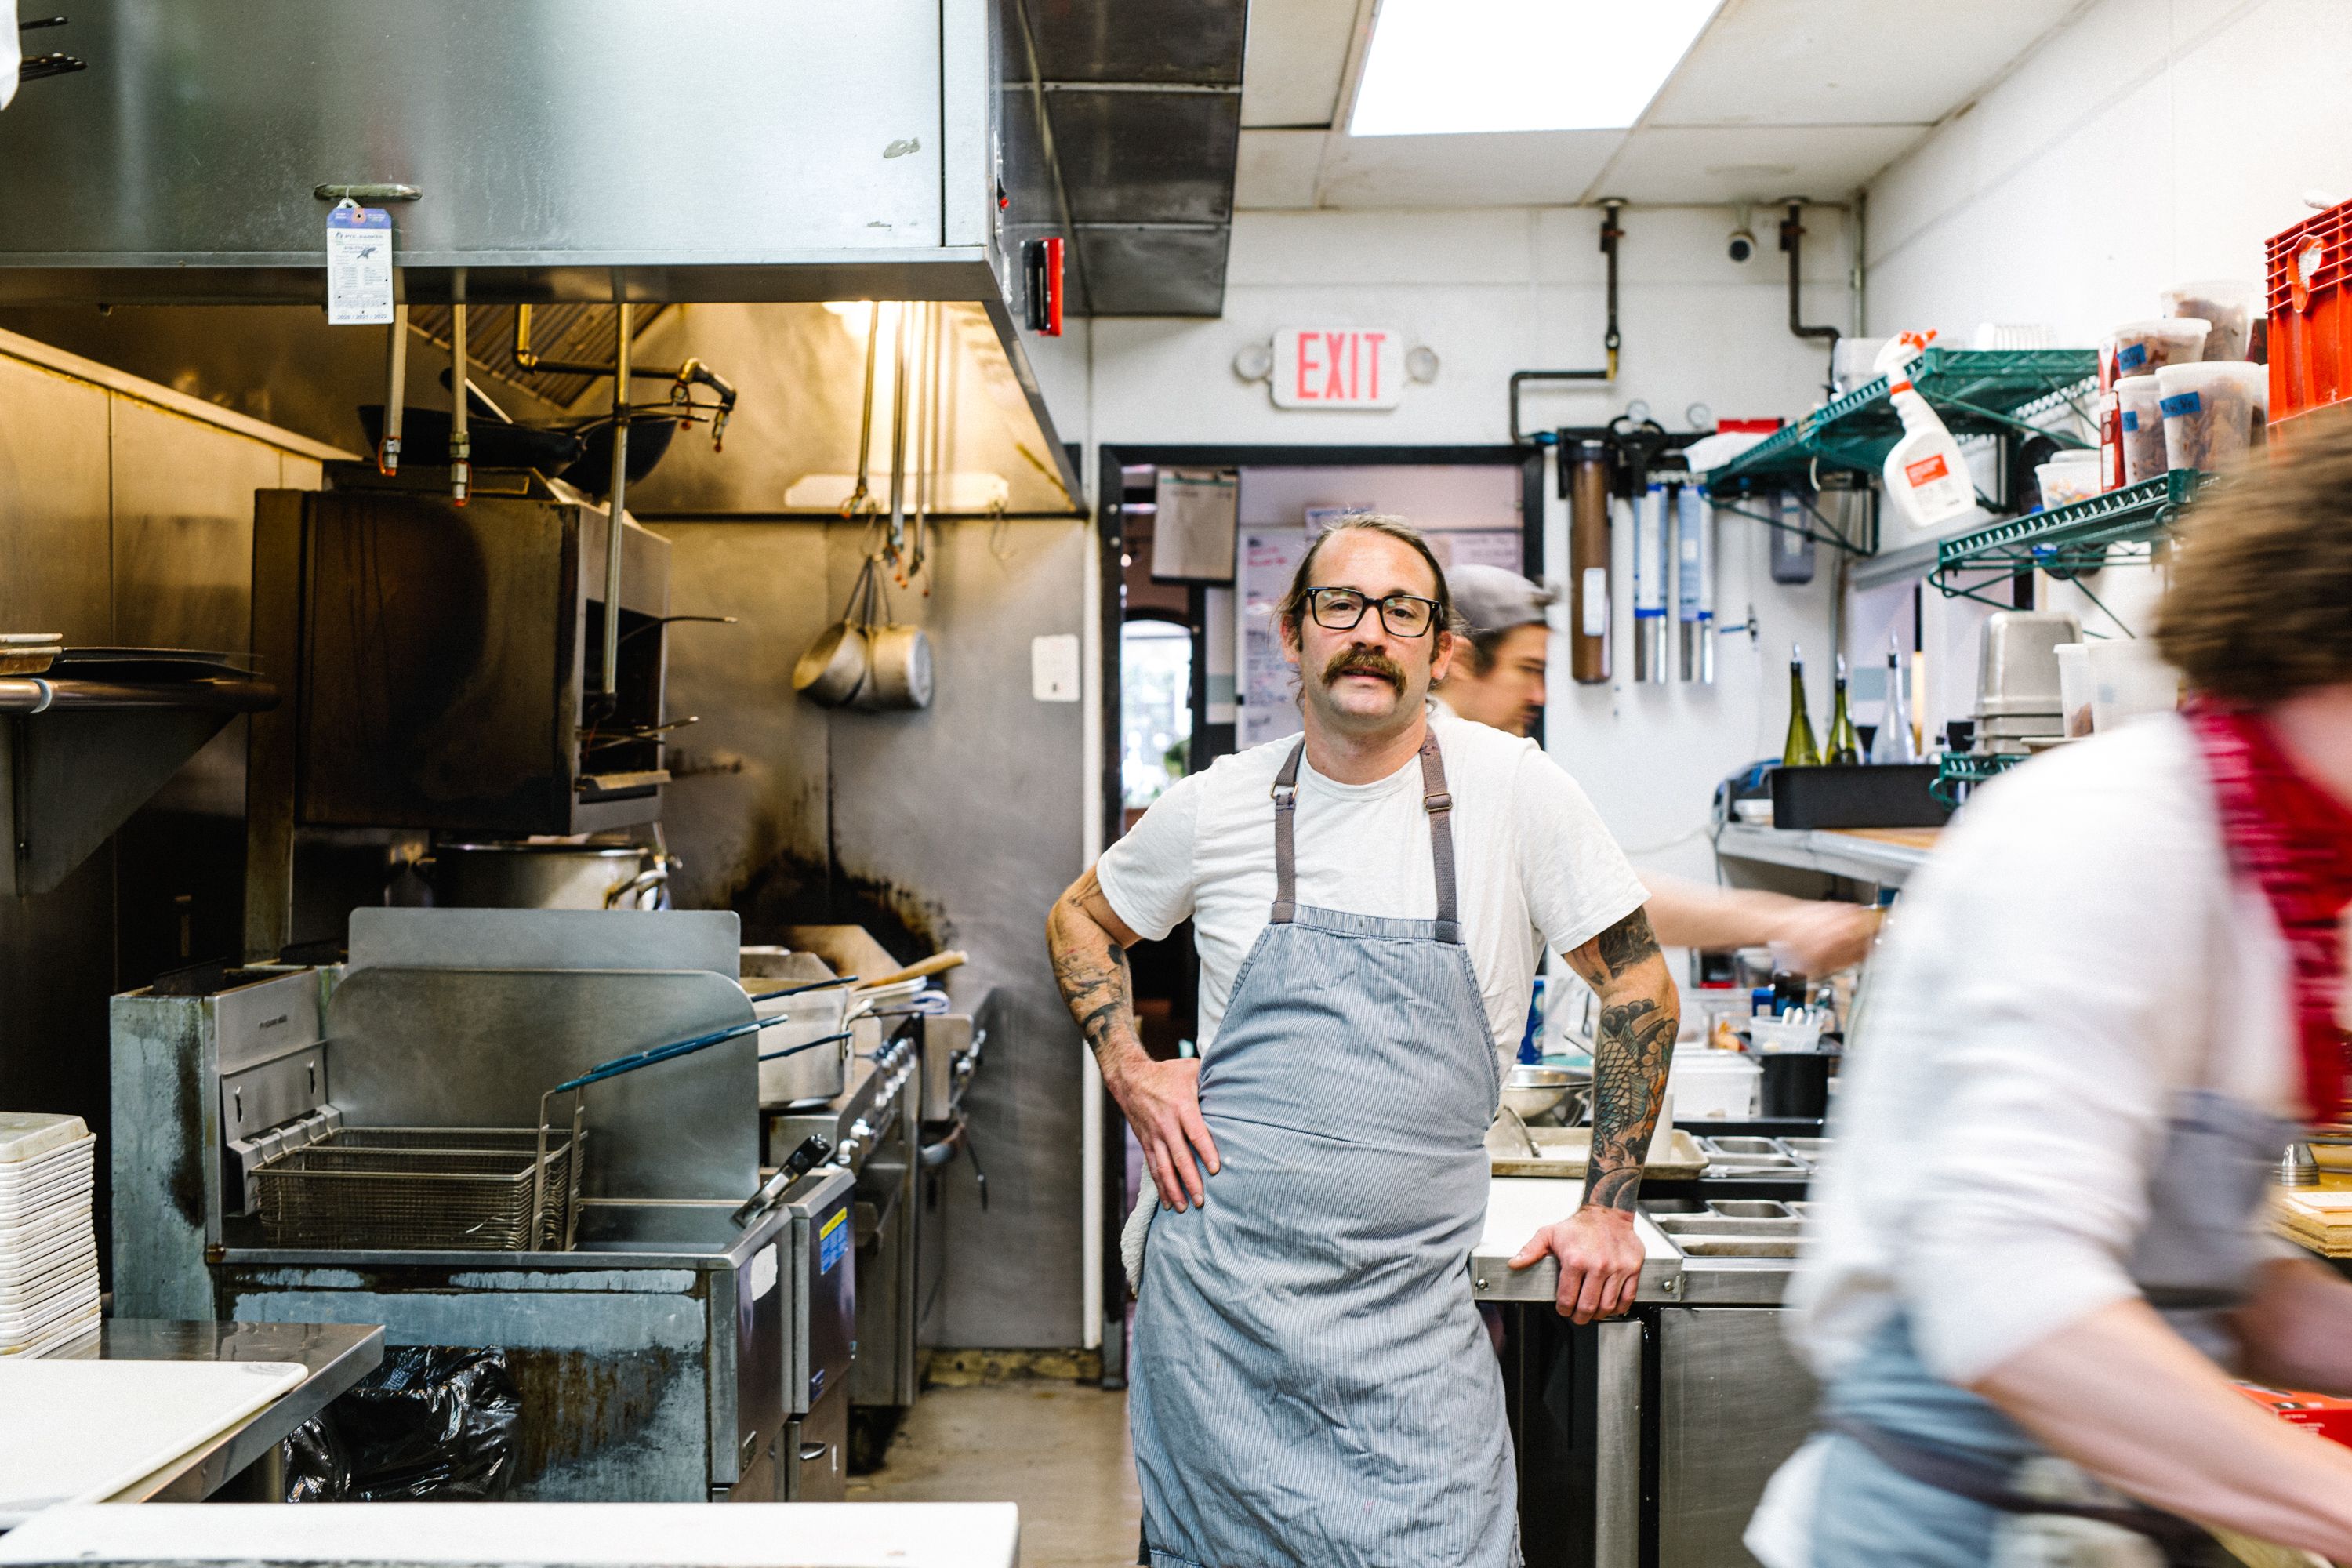 A man with a mustache stands in a busy kitchen. 